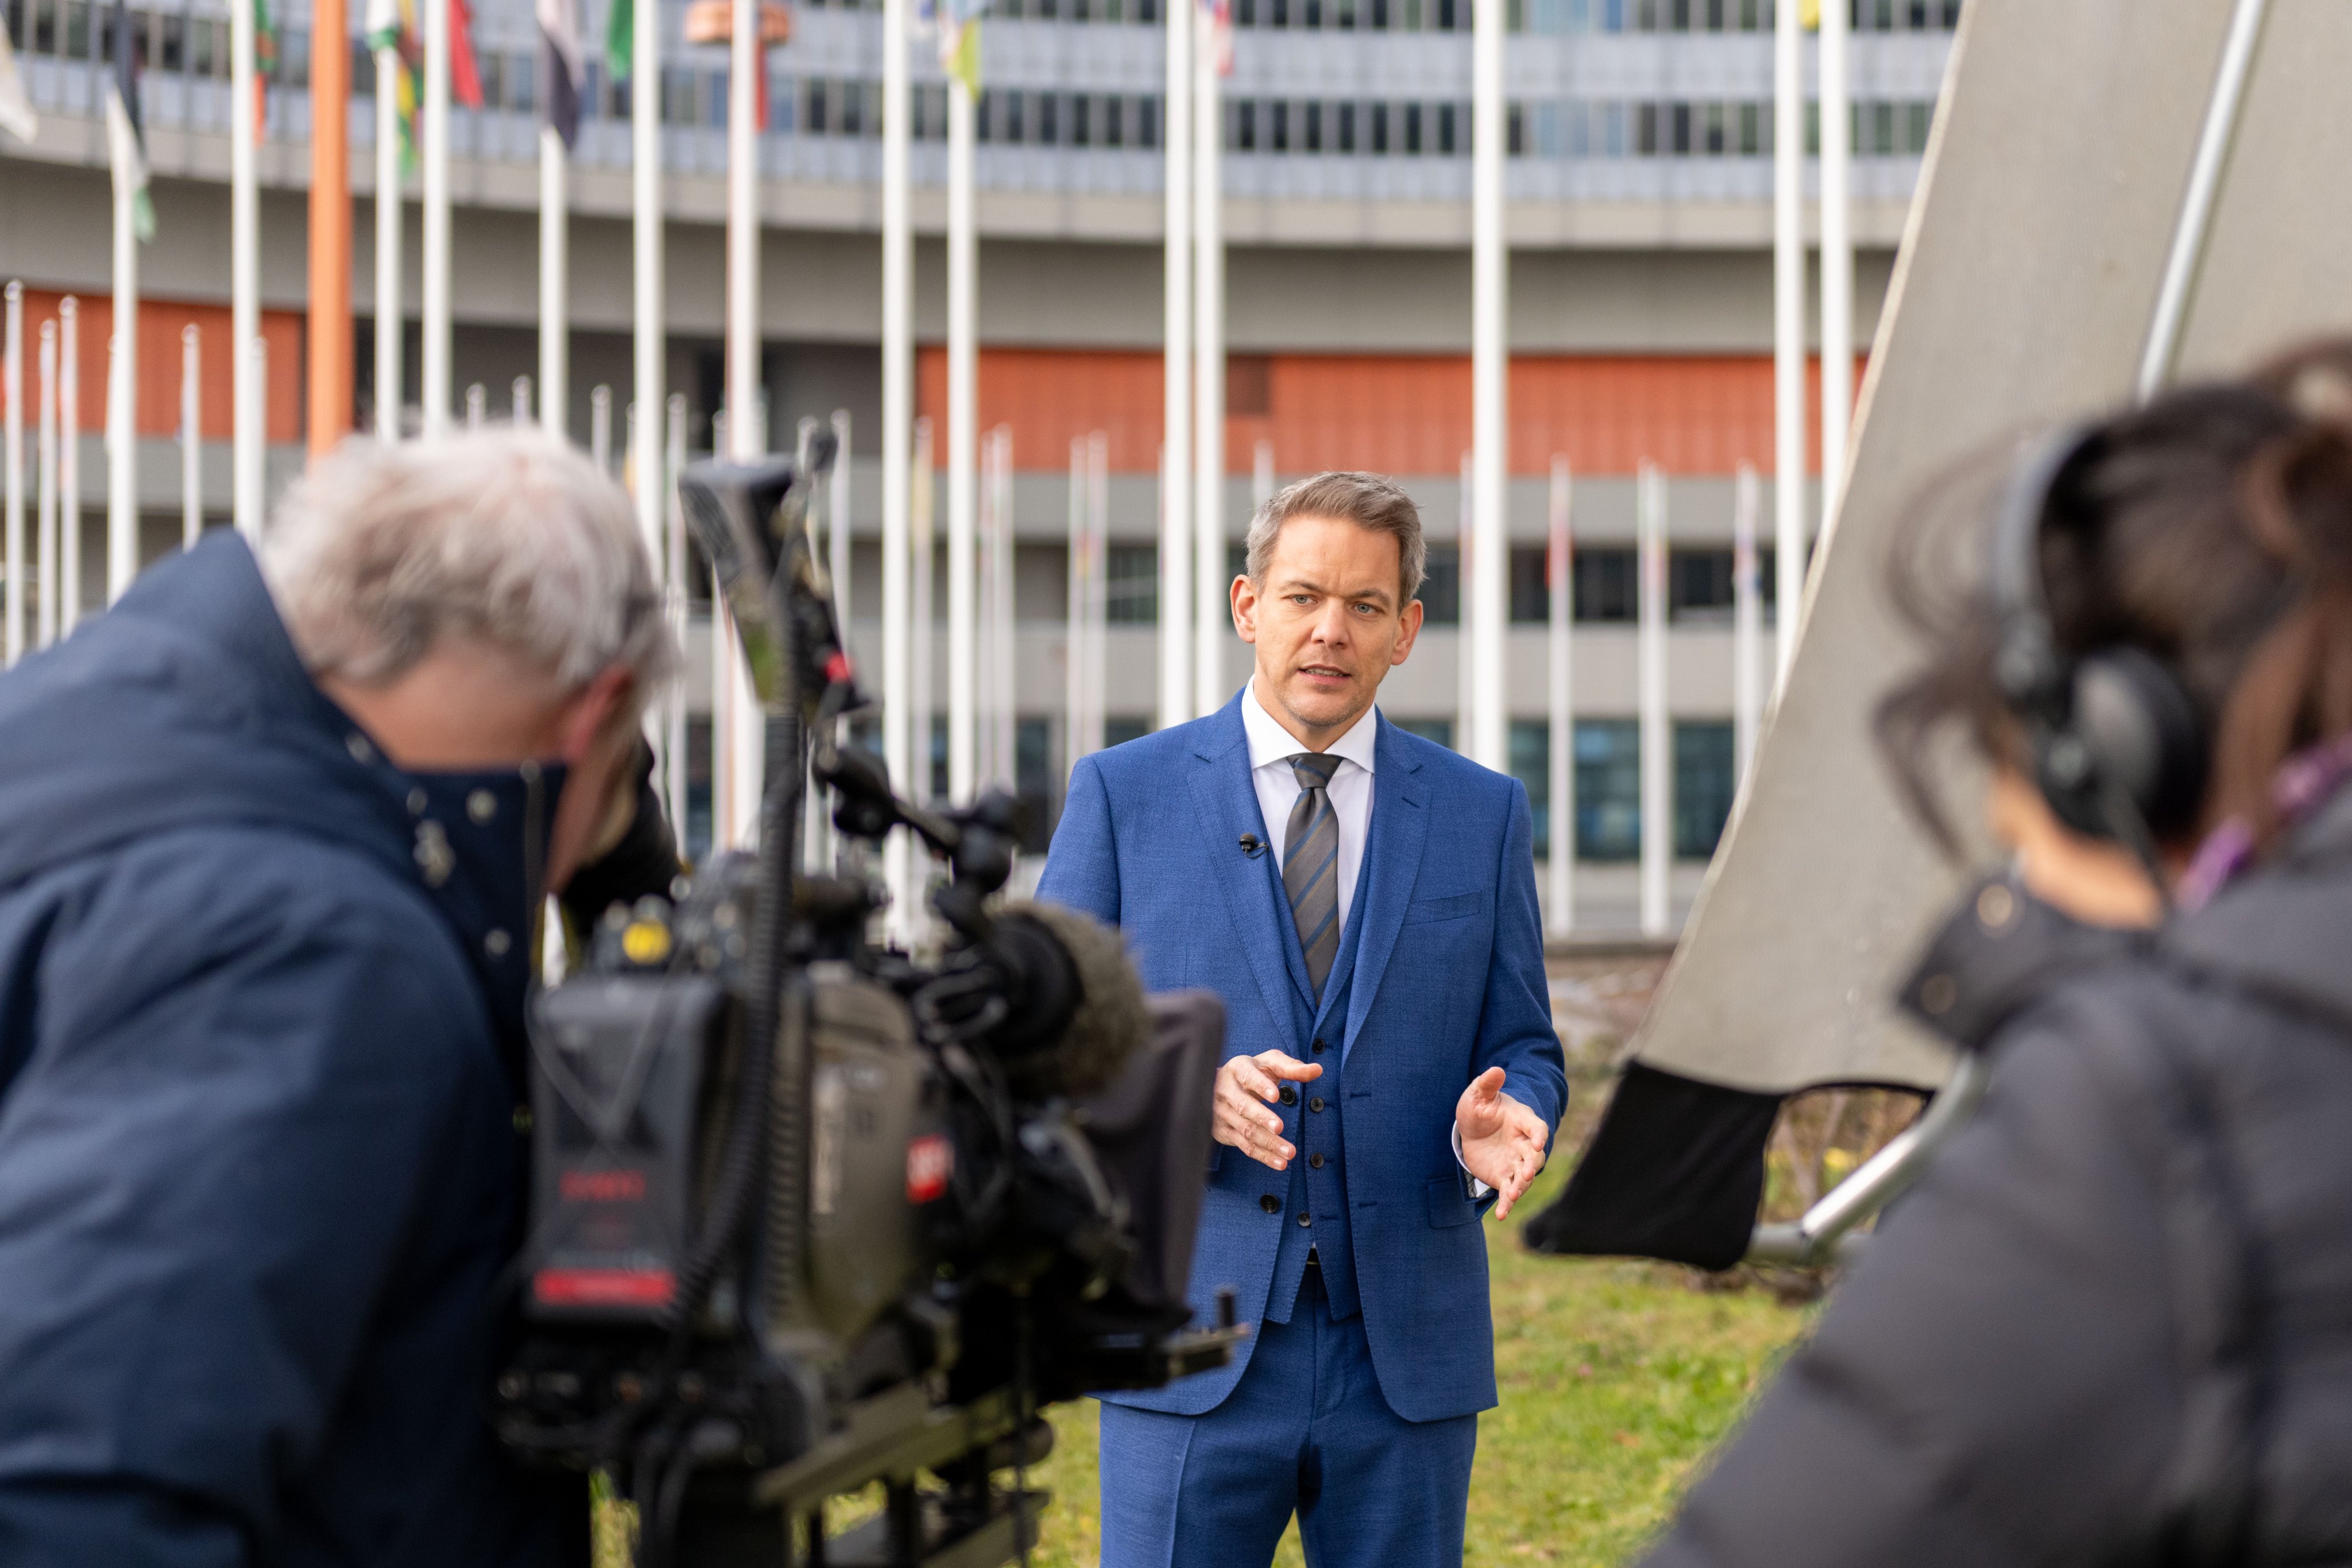 <sub><span class="ui-provider a b c d e f g h i j k l m n o p q r s t u v w x y z ab ac ae af ag ah ai aj ak">Martin Thür of the Austrian national public broadcaster ORF filming ZIB History on 75 years of human rights at the Vienna International Centre in 2023</span></sub>